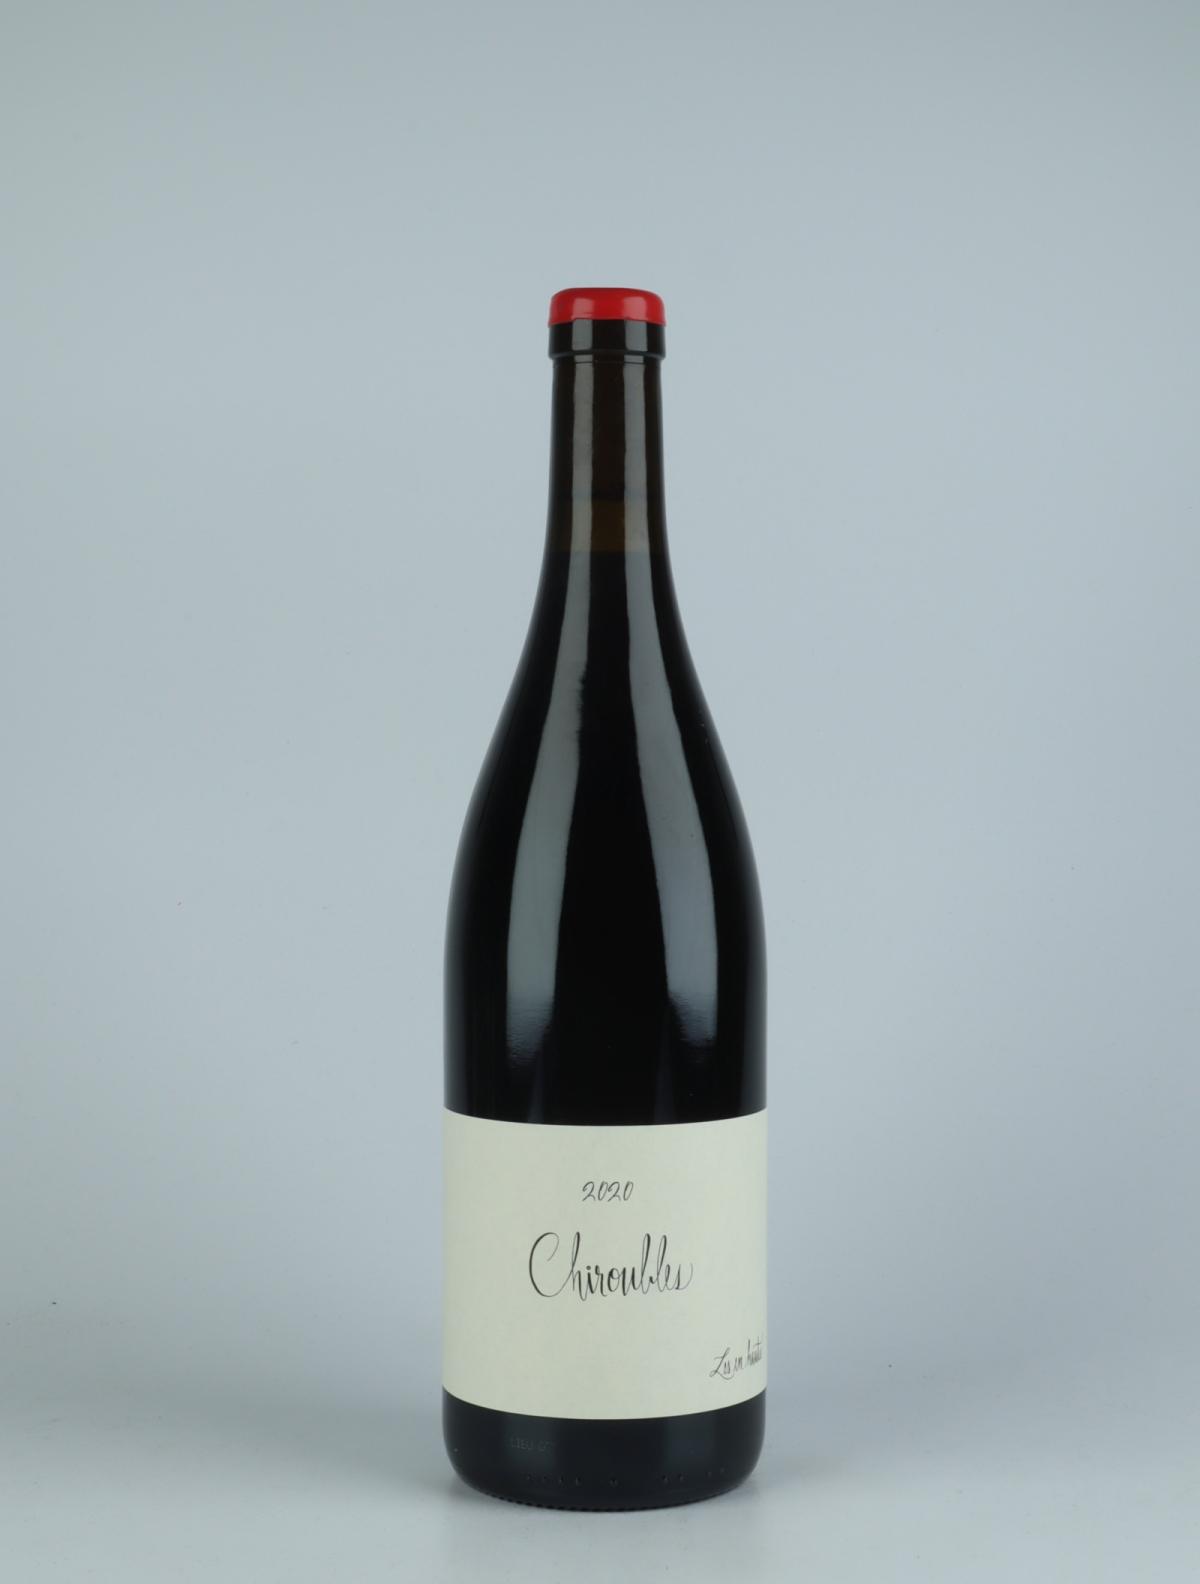 A bottle 2020 Chiroubles Red wine from Les En Hauts, Beaujolais in France